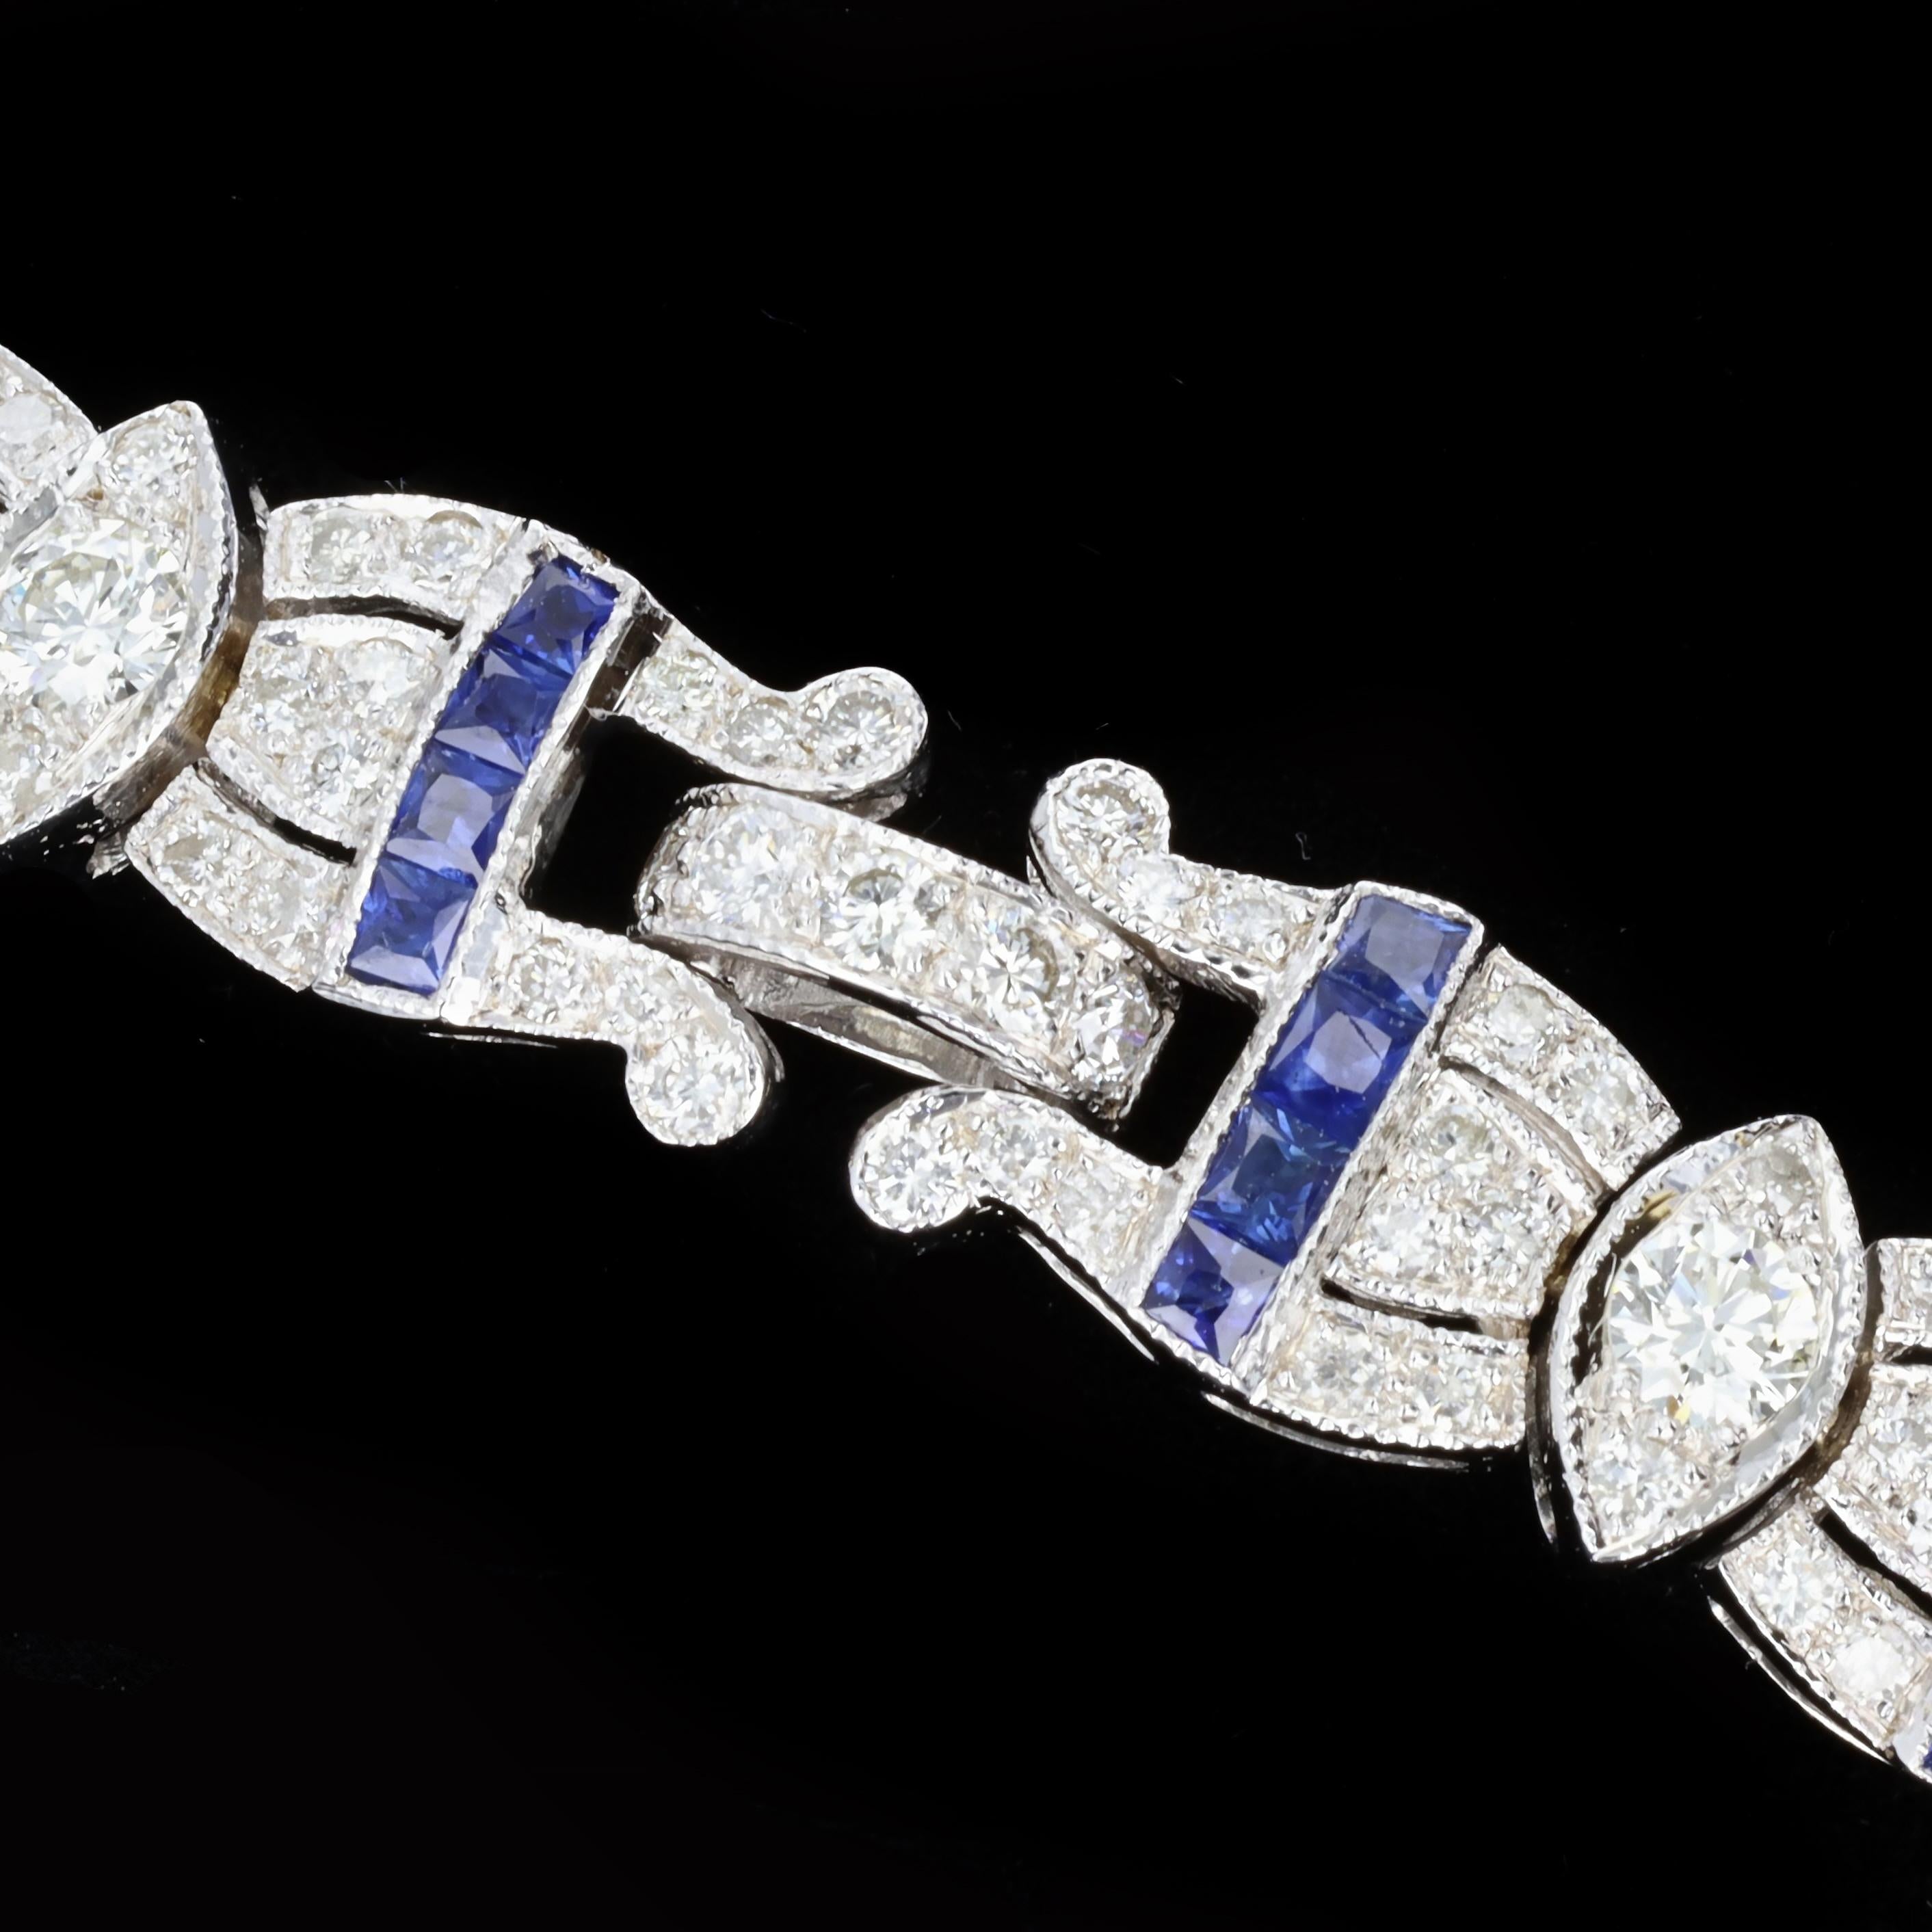 A brilliant diamond and sapphire bracelet that will sparkle as bright as you do. This 18K white gold bracelet is set with round cut diamonds weighing approximately 3.67ct. and is accented by 56 lovely square cut sapphires. The color of these